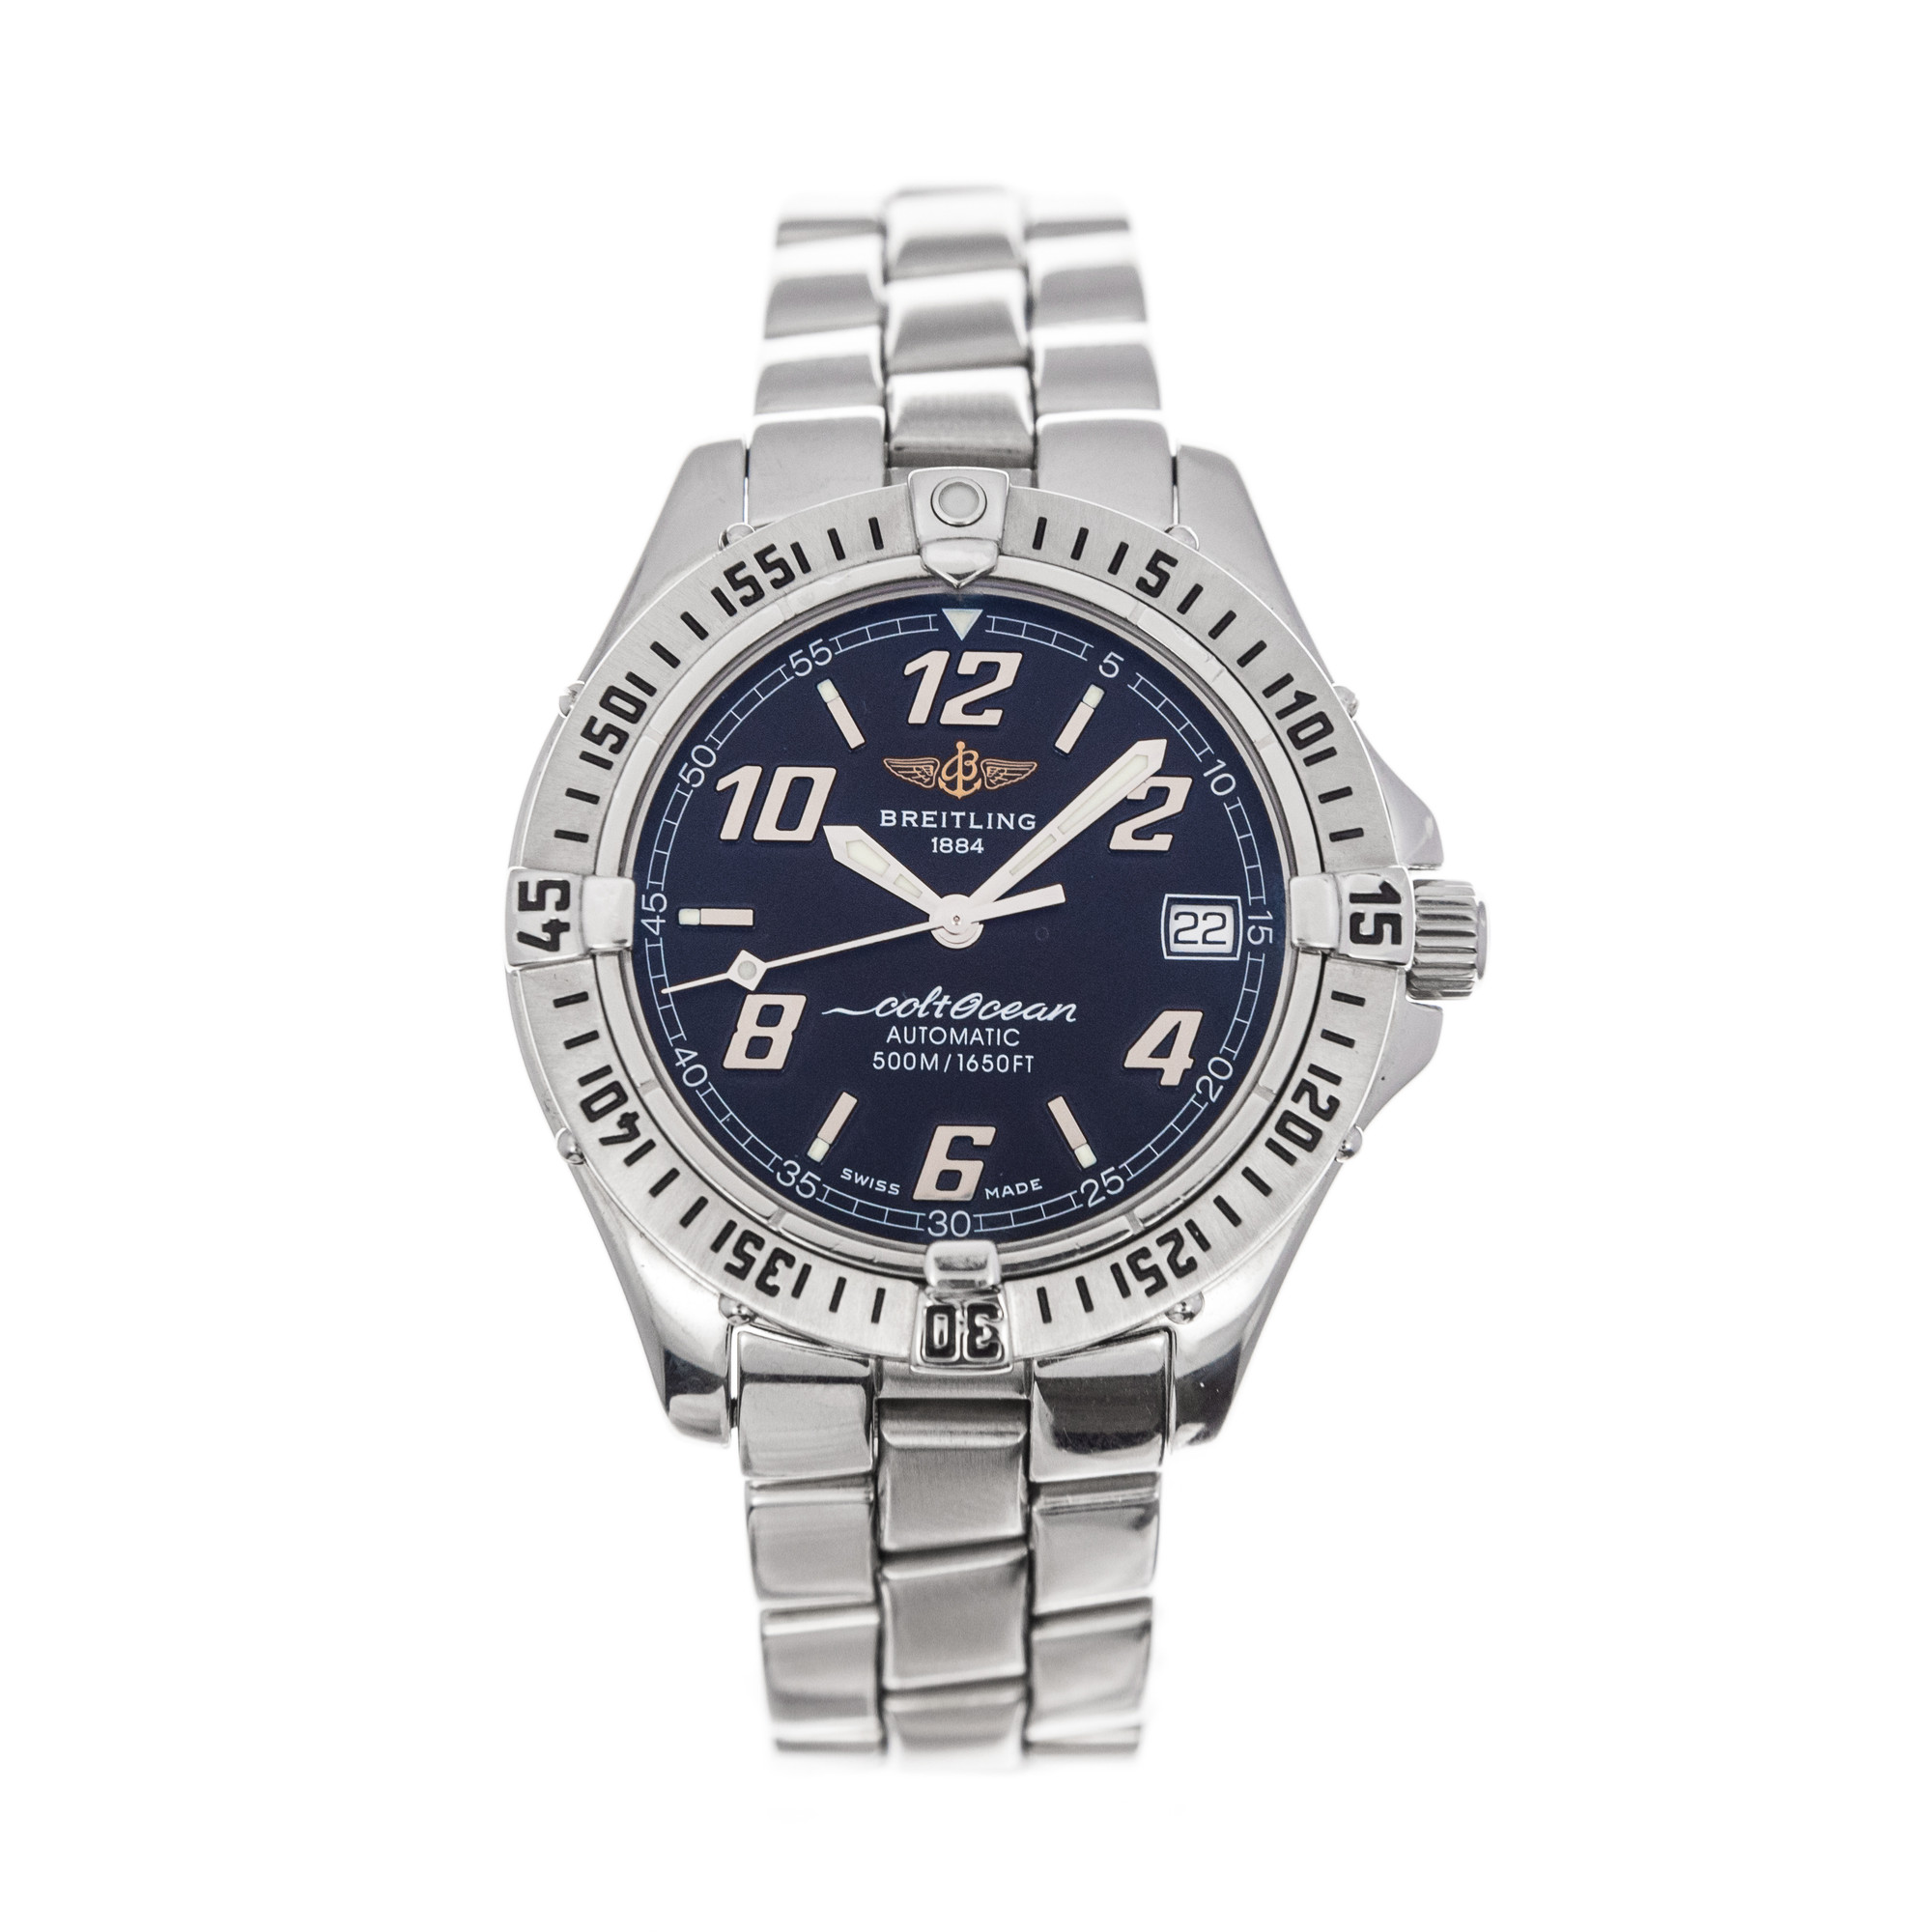 Breitling Colt Ocean Automatic *Box and Papers*